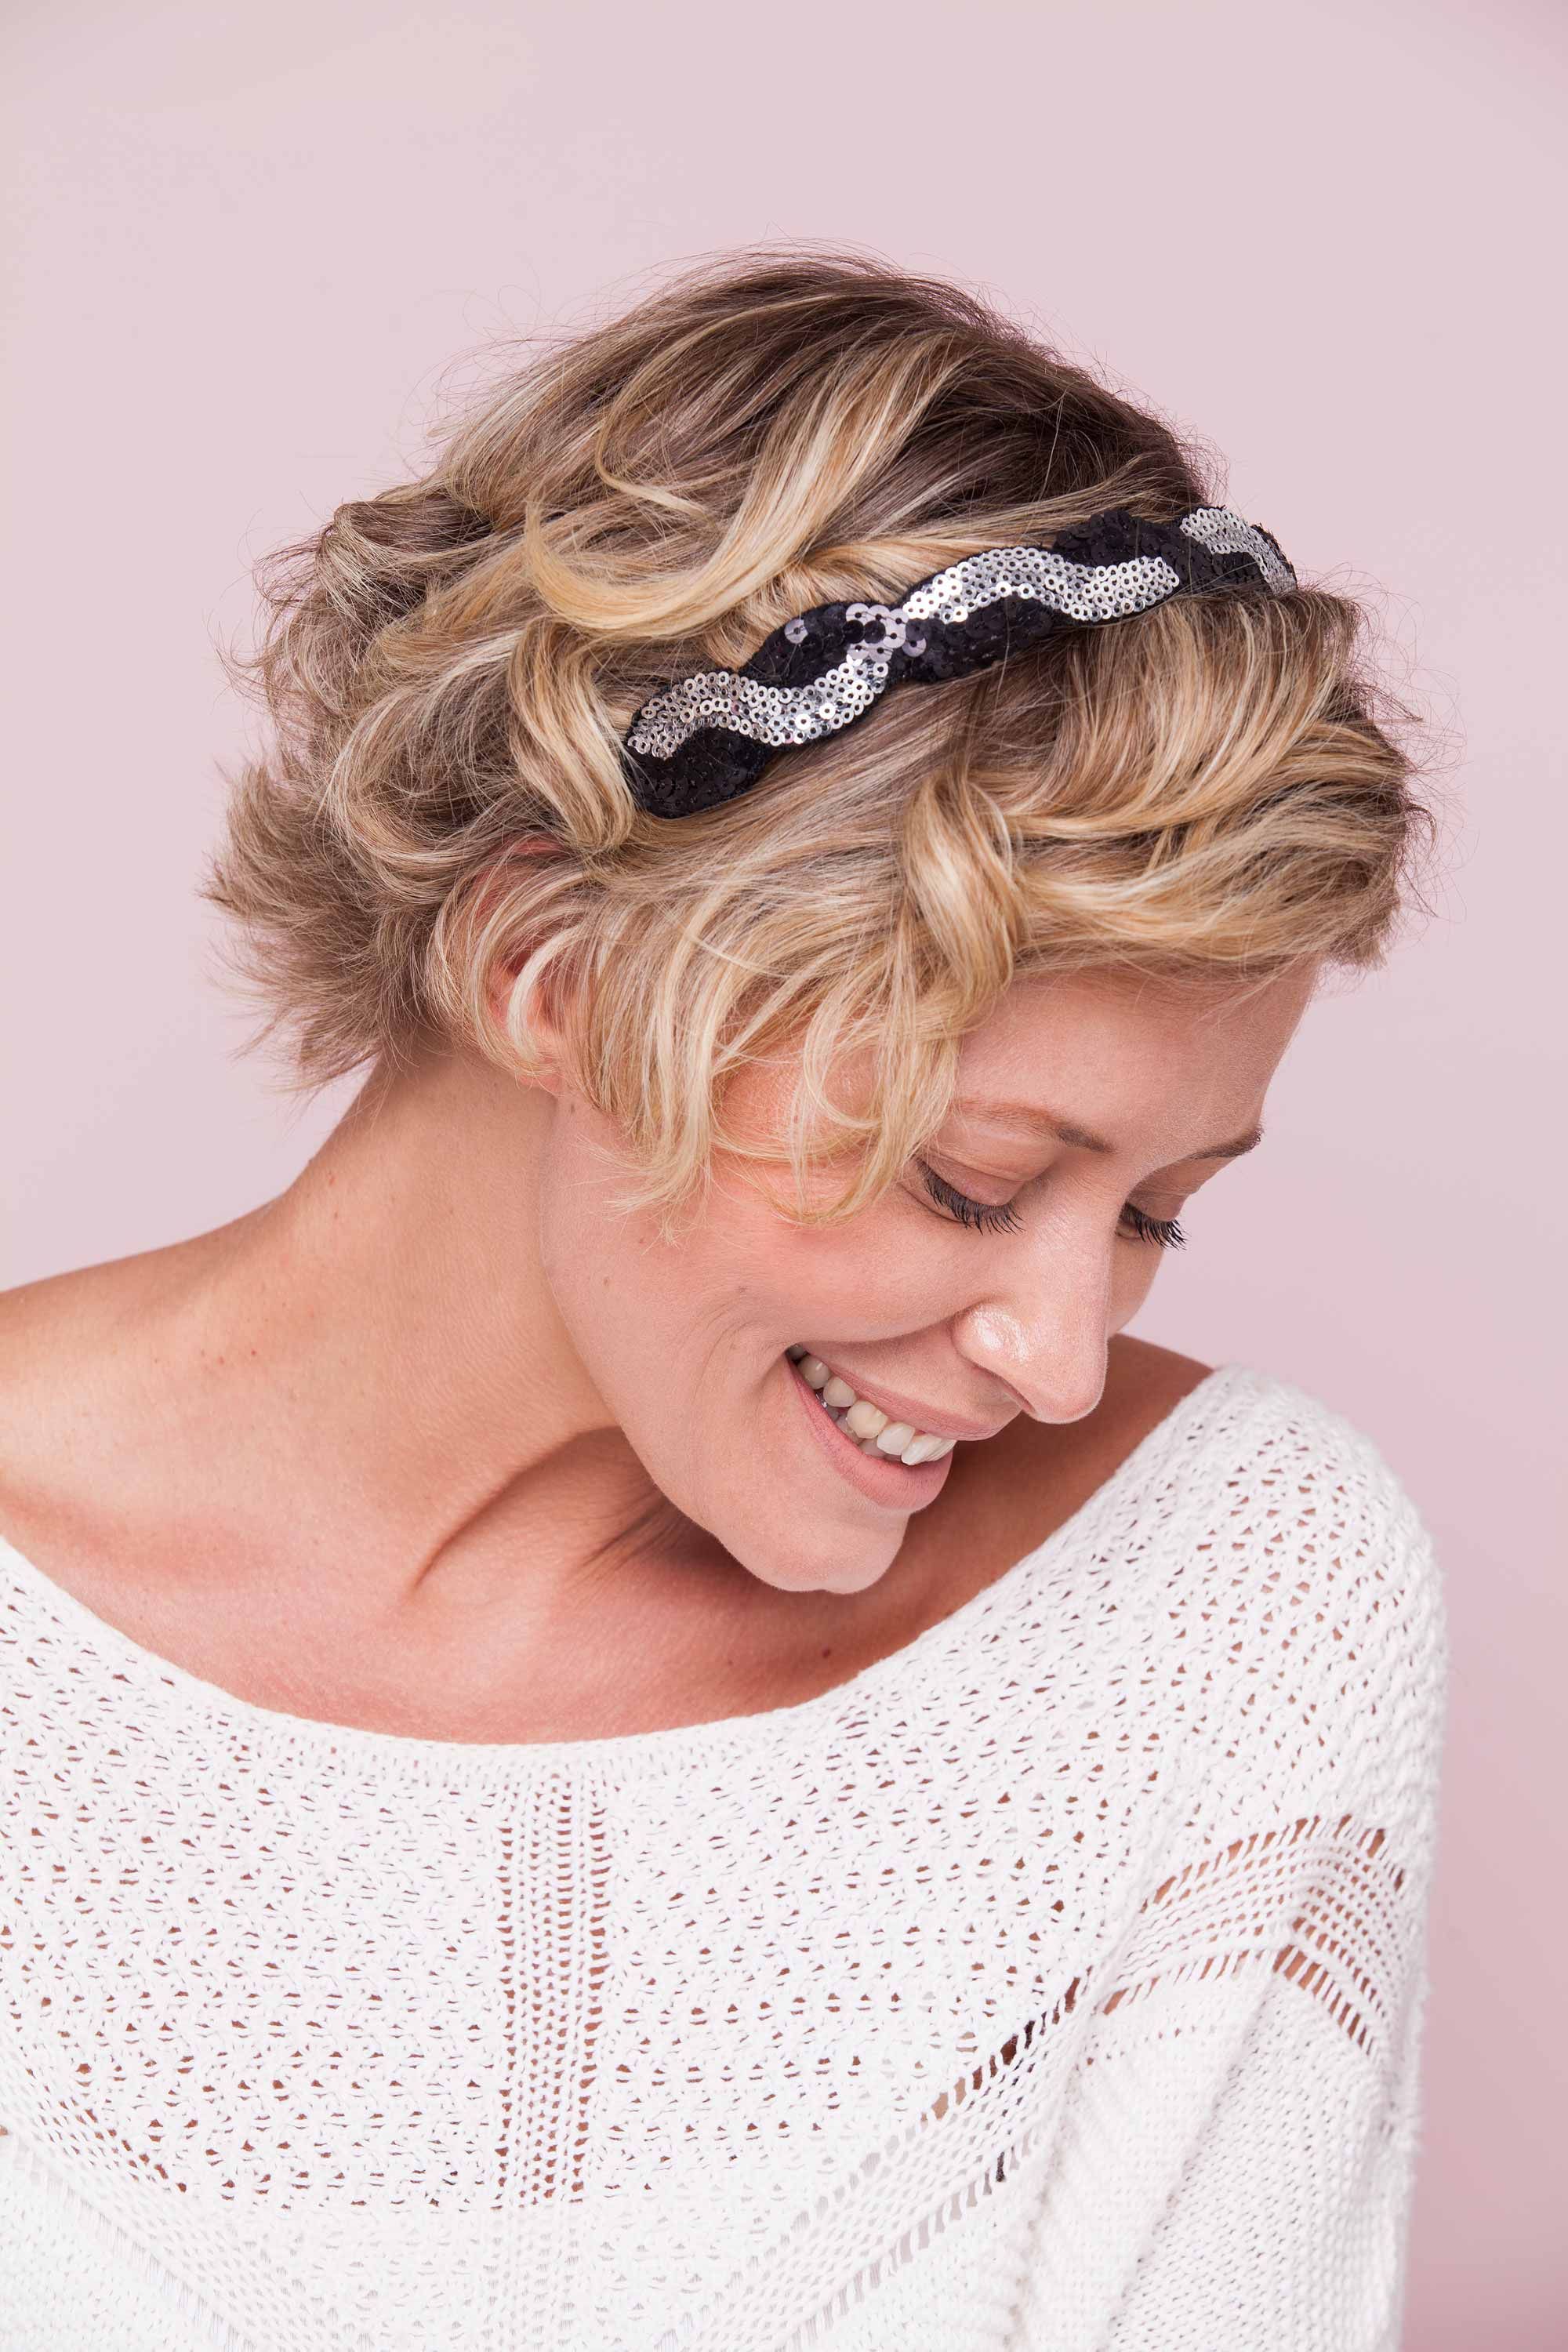 11 Glitzy Wedding Guest Hairstyles For End Of Year Weddings In Short Hairstyle For Wedding Guest (View 18 of 25)